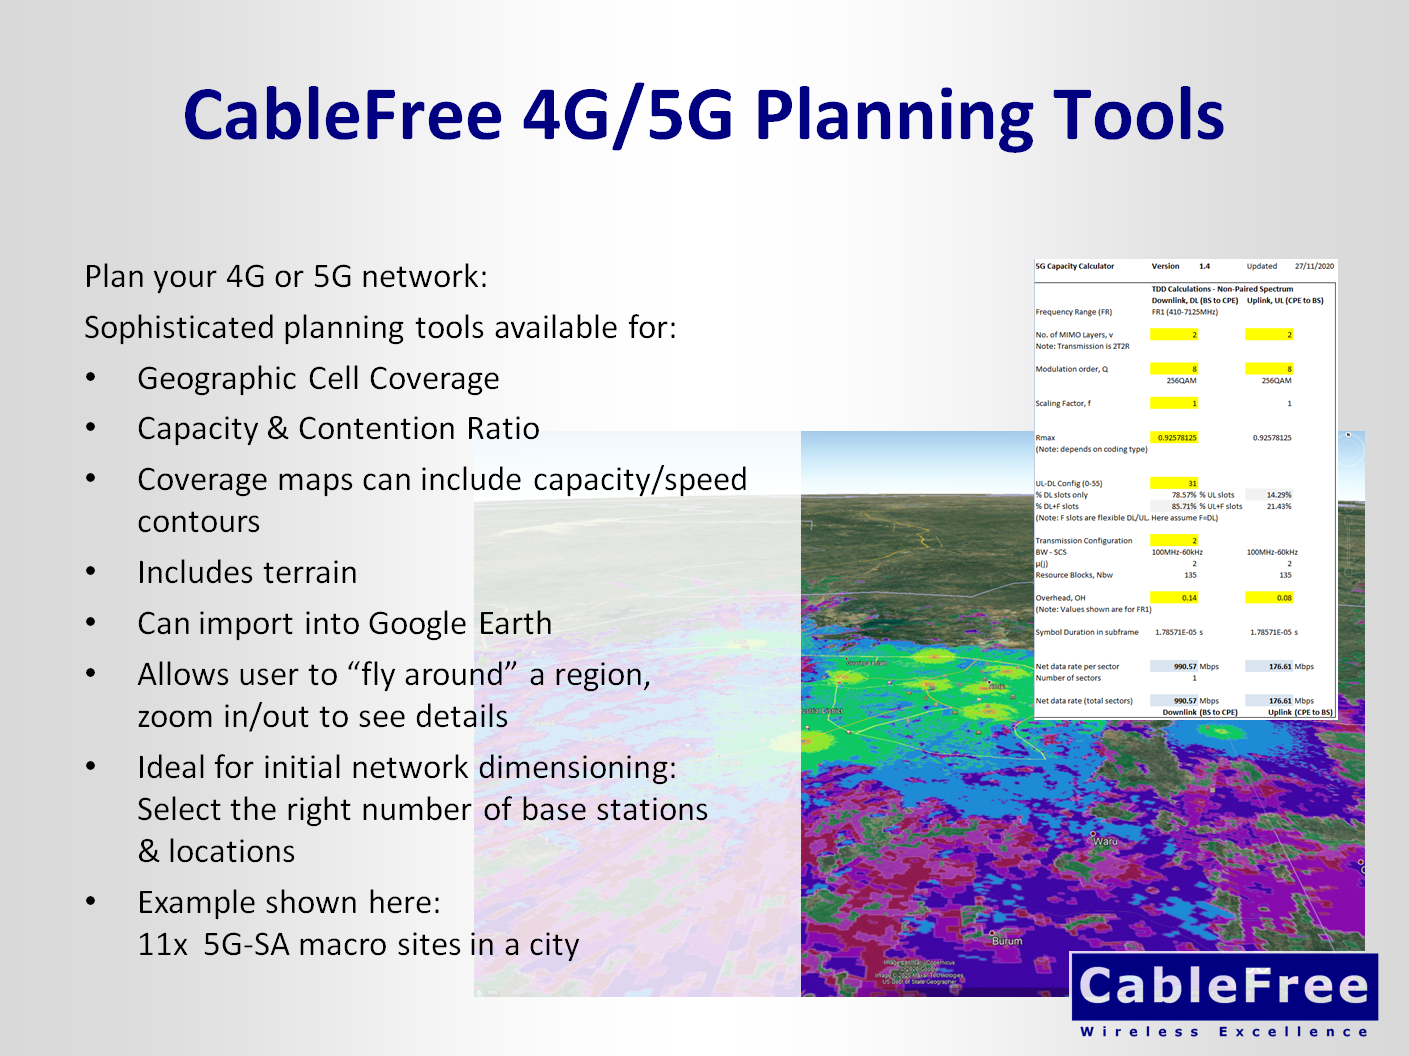 CableFree 5G Planning Tools